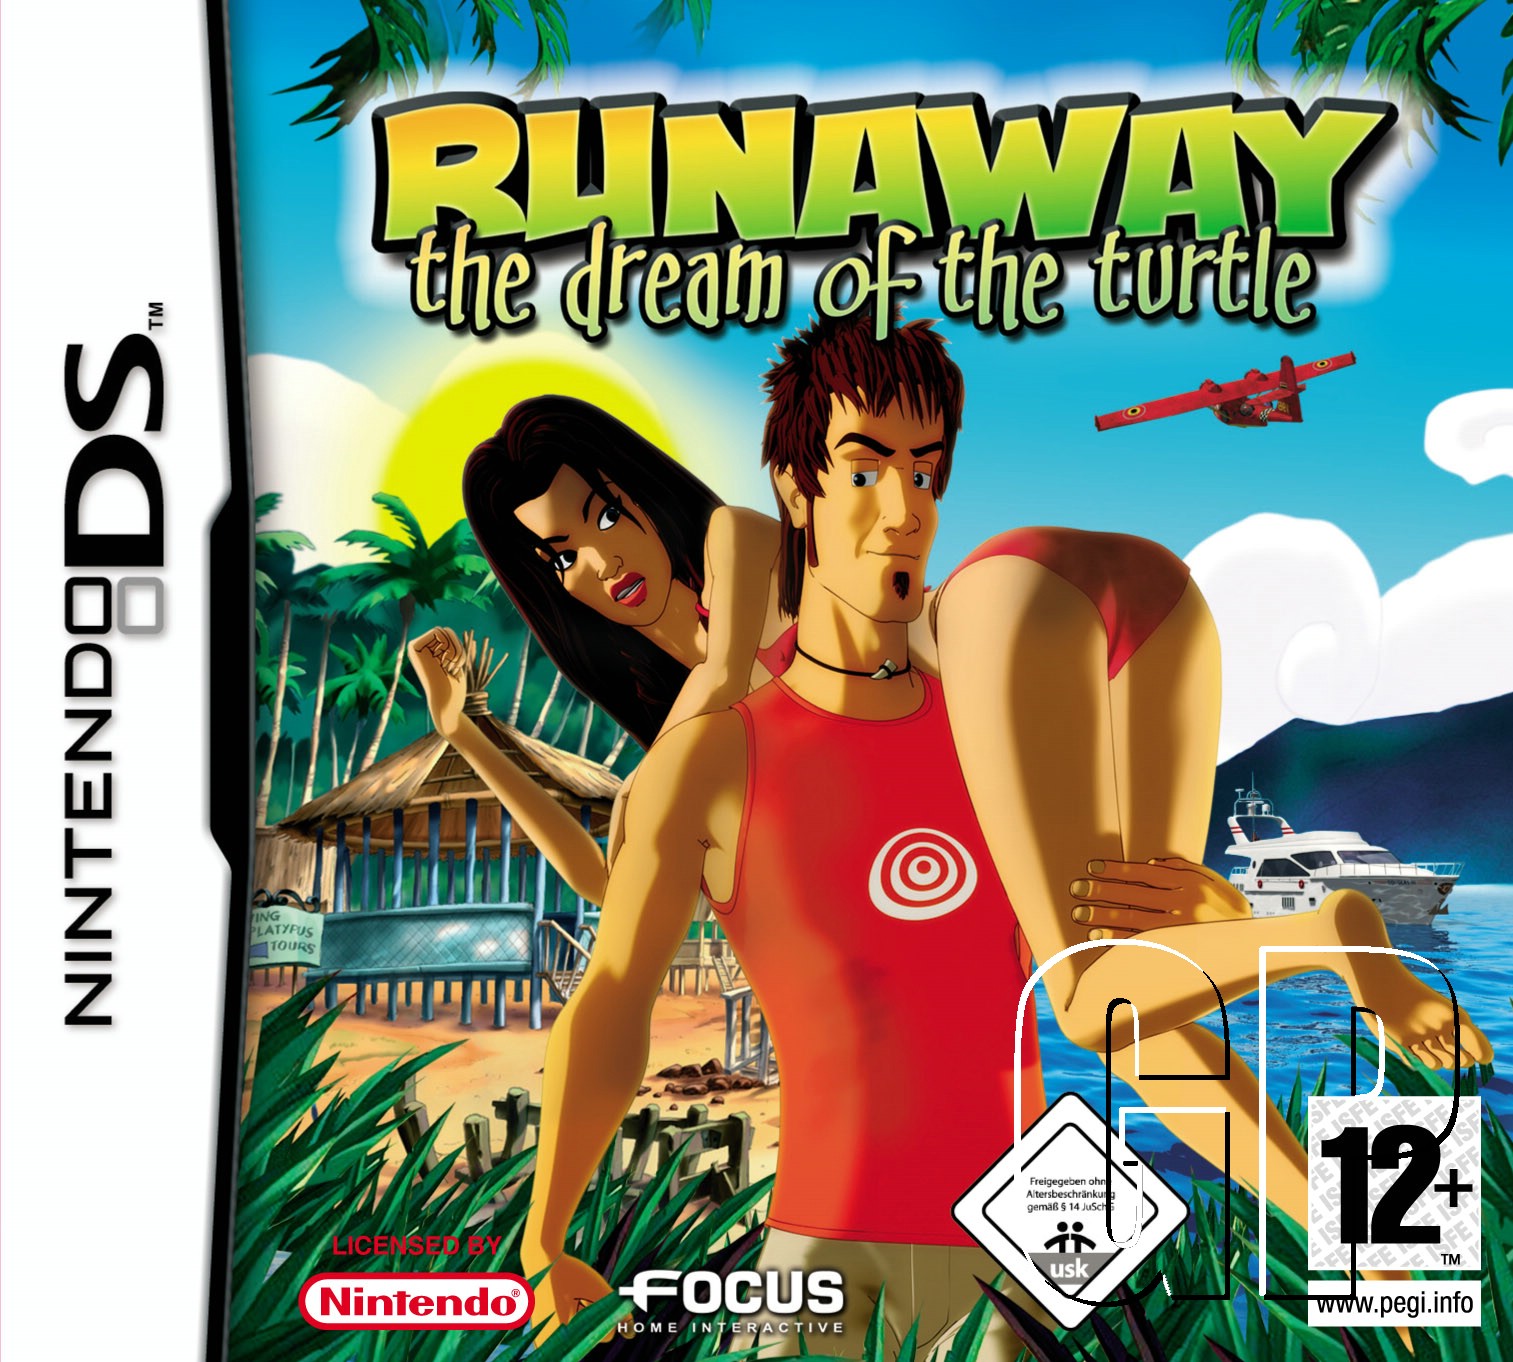 Runaway, The Dream of the Turtle DS: Boxart, Screens and Fact Sheet